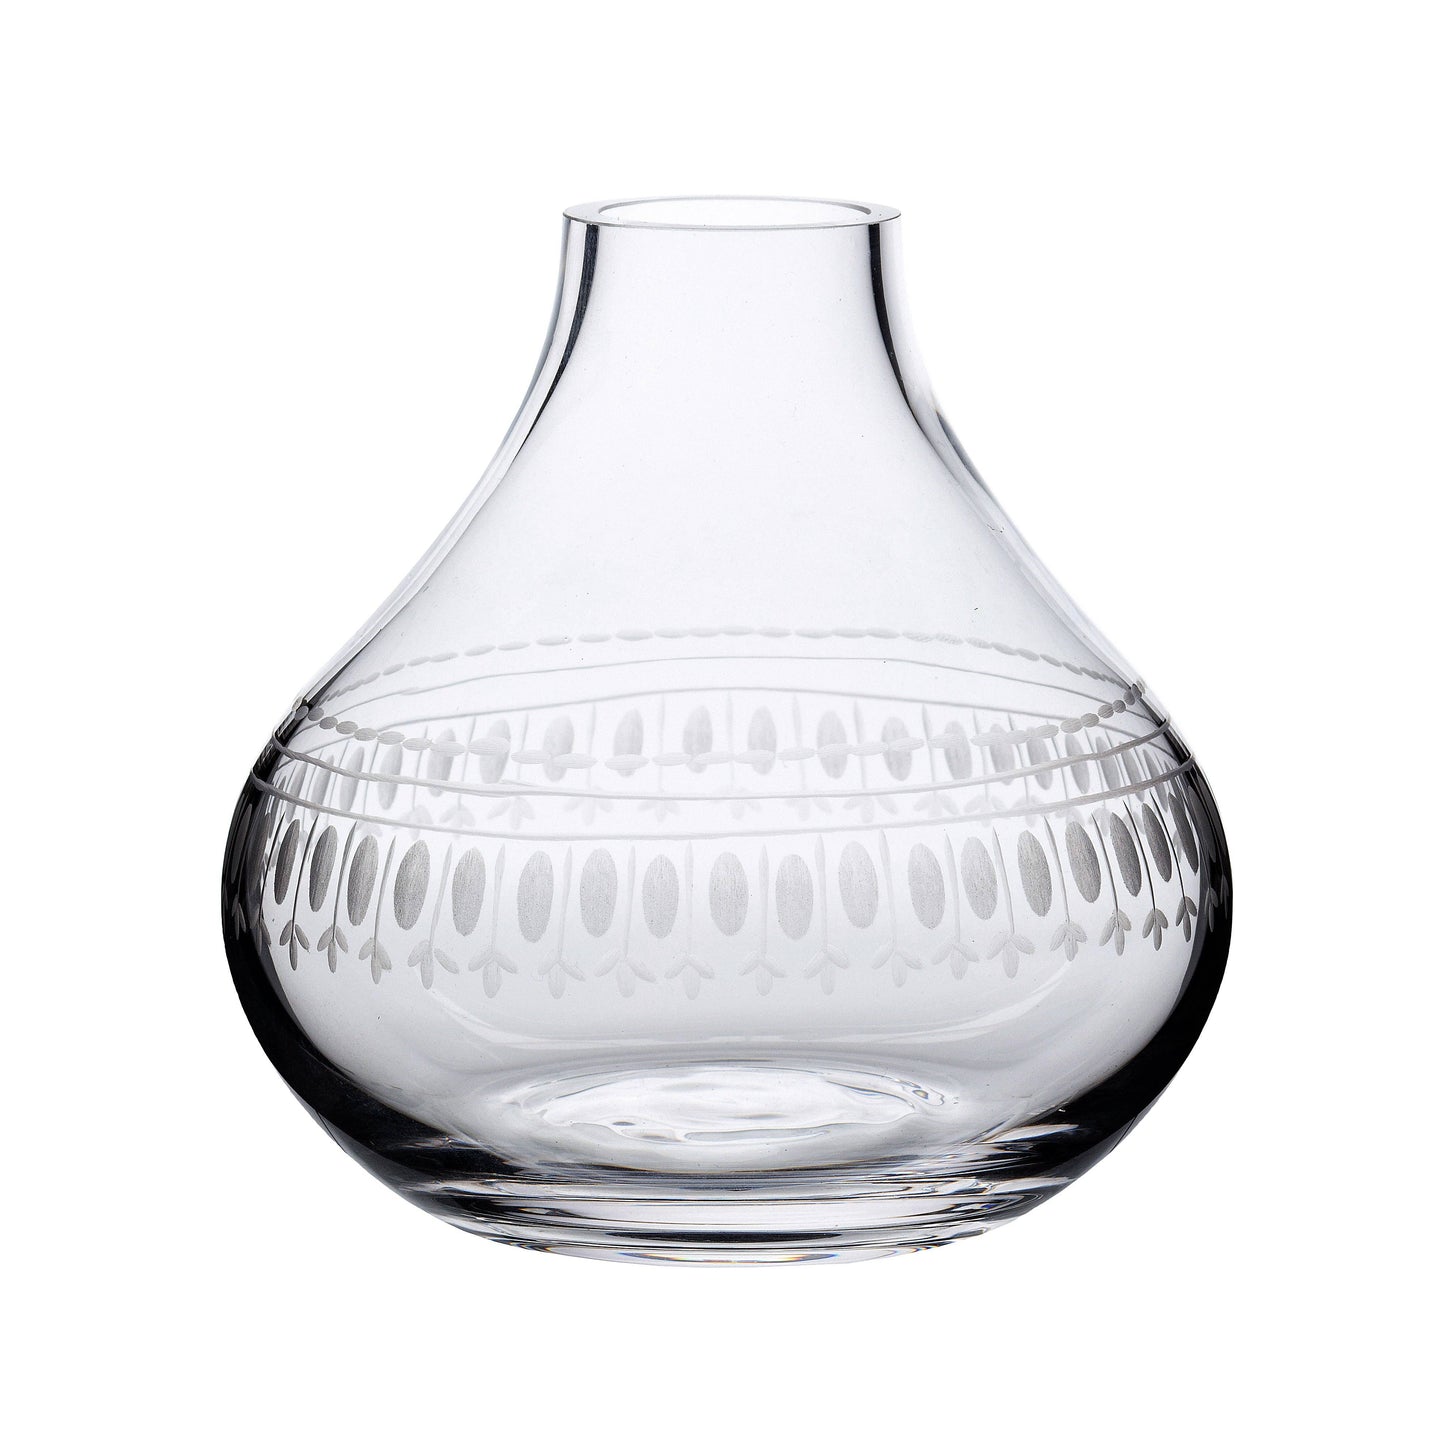 The Vintage List - A Small Crystal Vase with Ovals Design